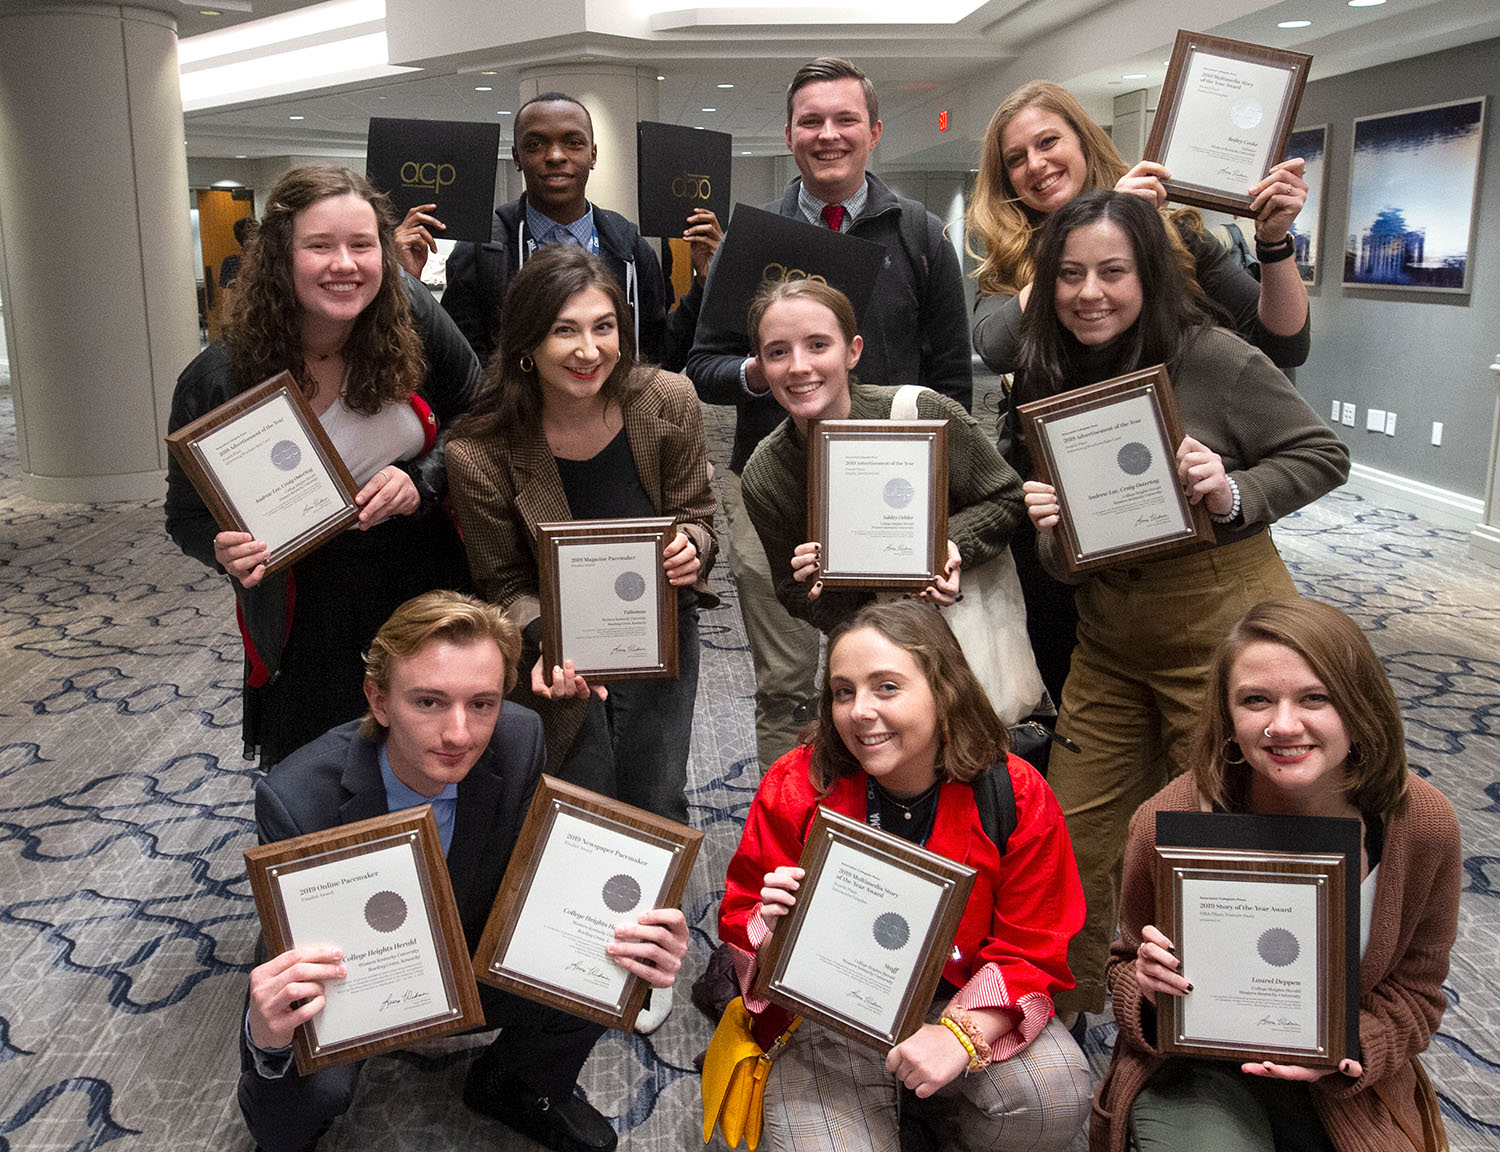 Students celebrate with their awards during the National College Media Convention in Washington D.C. in 2019.